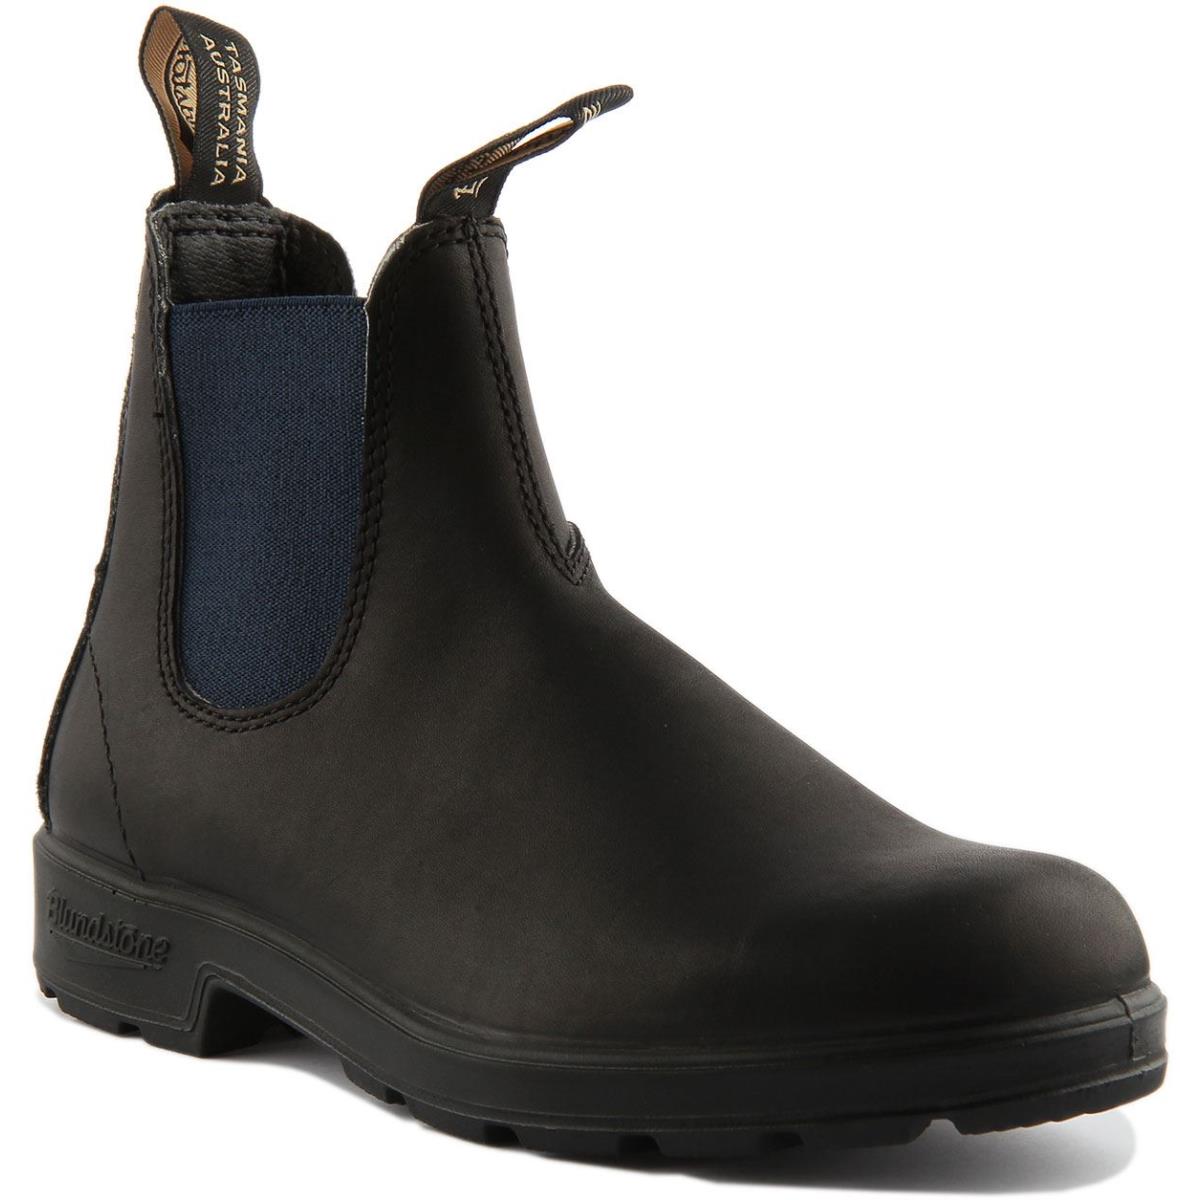 Blundstone 1917 Unisex Pull On Leather Chelsea Boots In Black Blue Size US 4- 13 BLACK BLUE